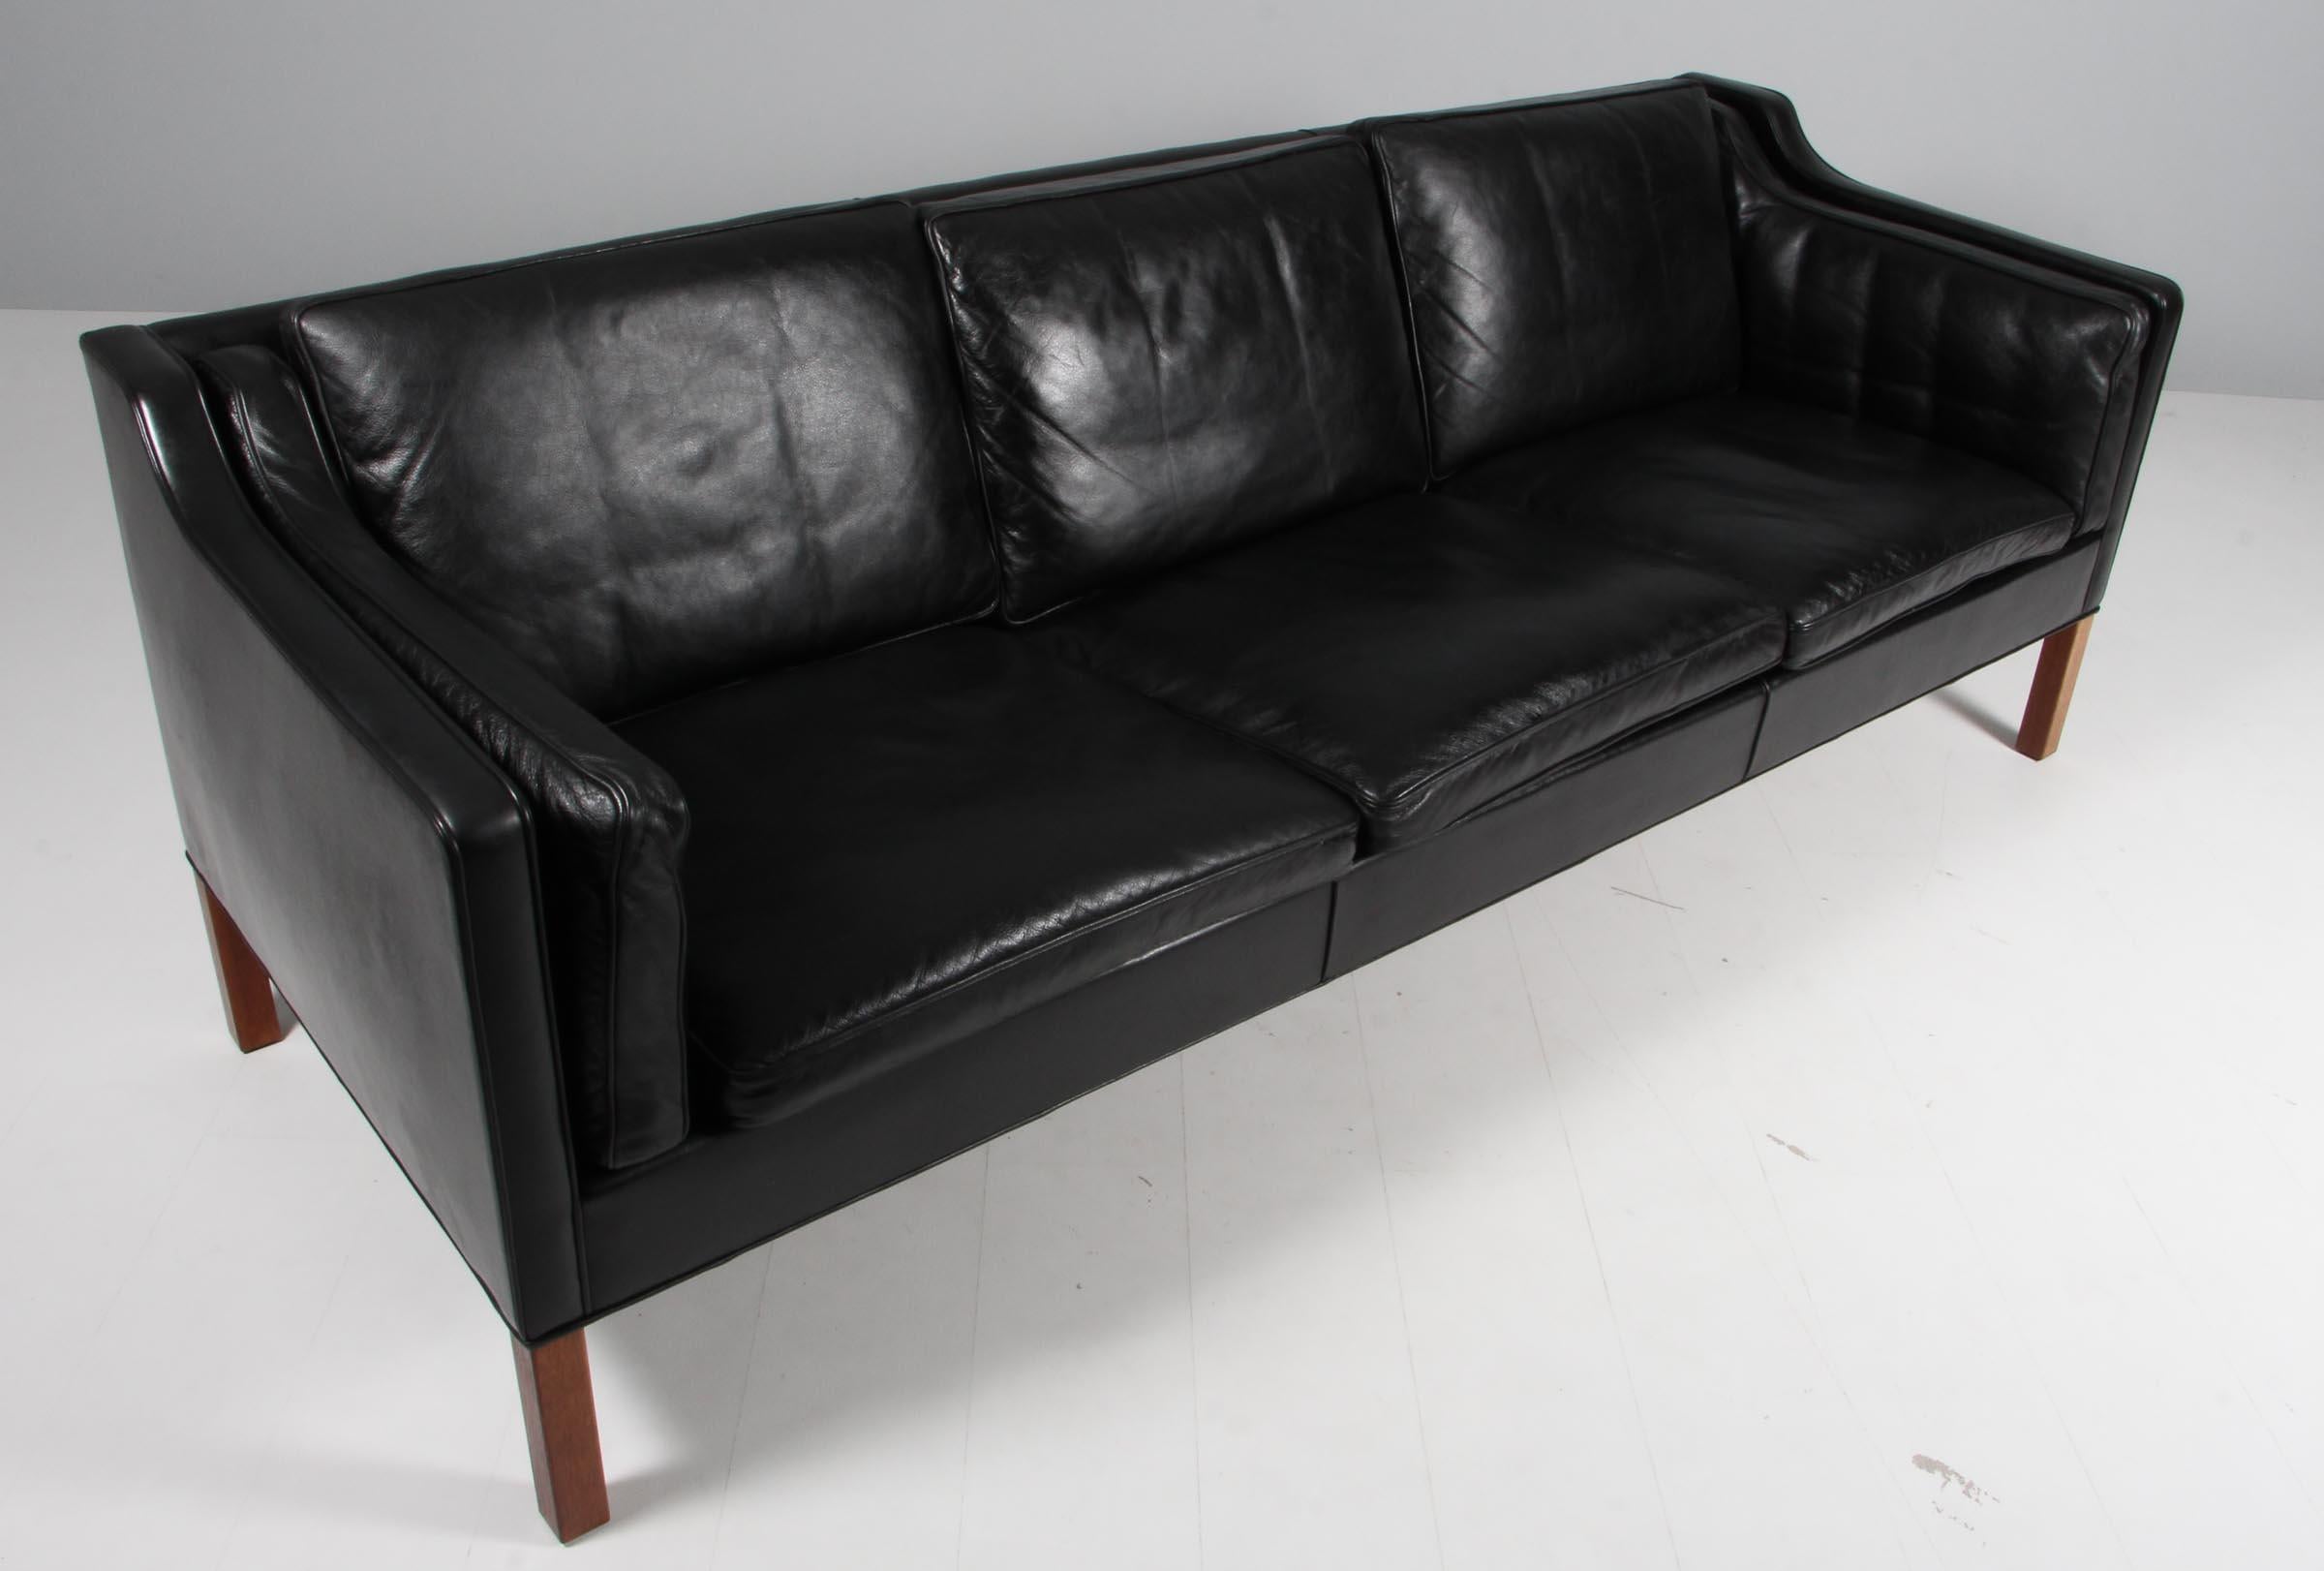 Børge Mogensen three-seat sofa with original patinated black leather upholstery.

Legs of teak.

Model 2213, made by Fredericia Furniture.